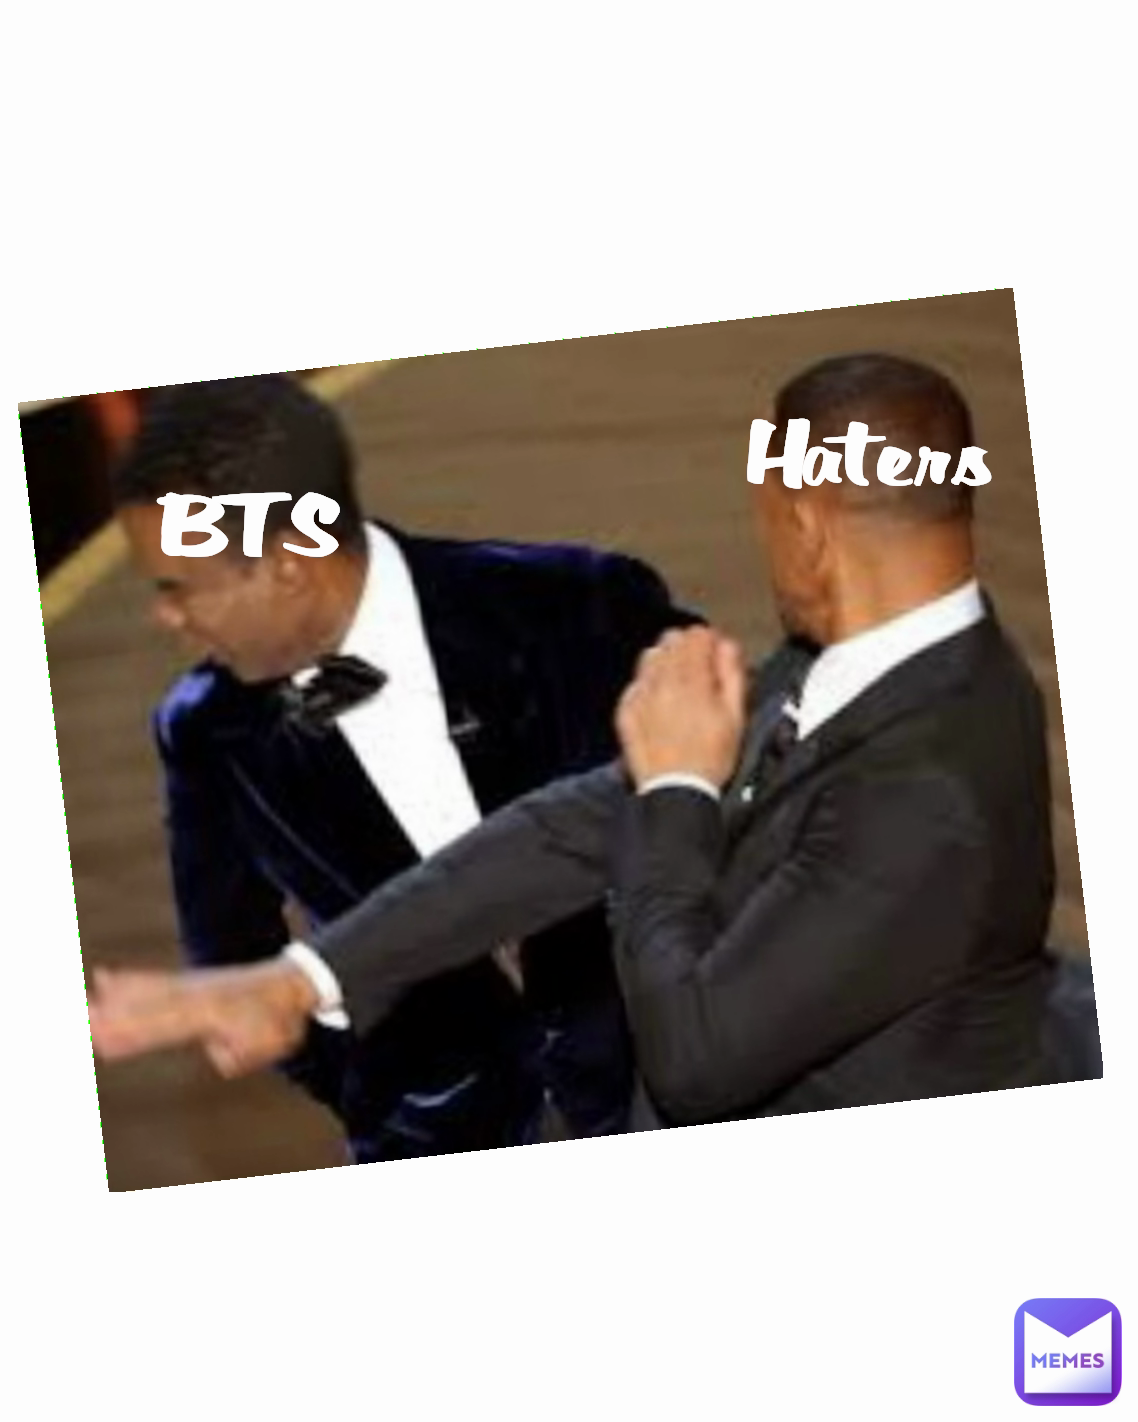 Haters
 BTS